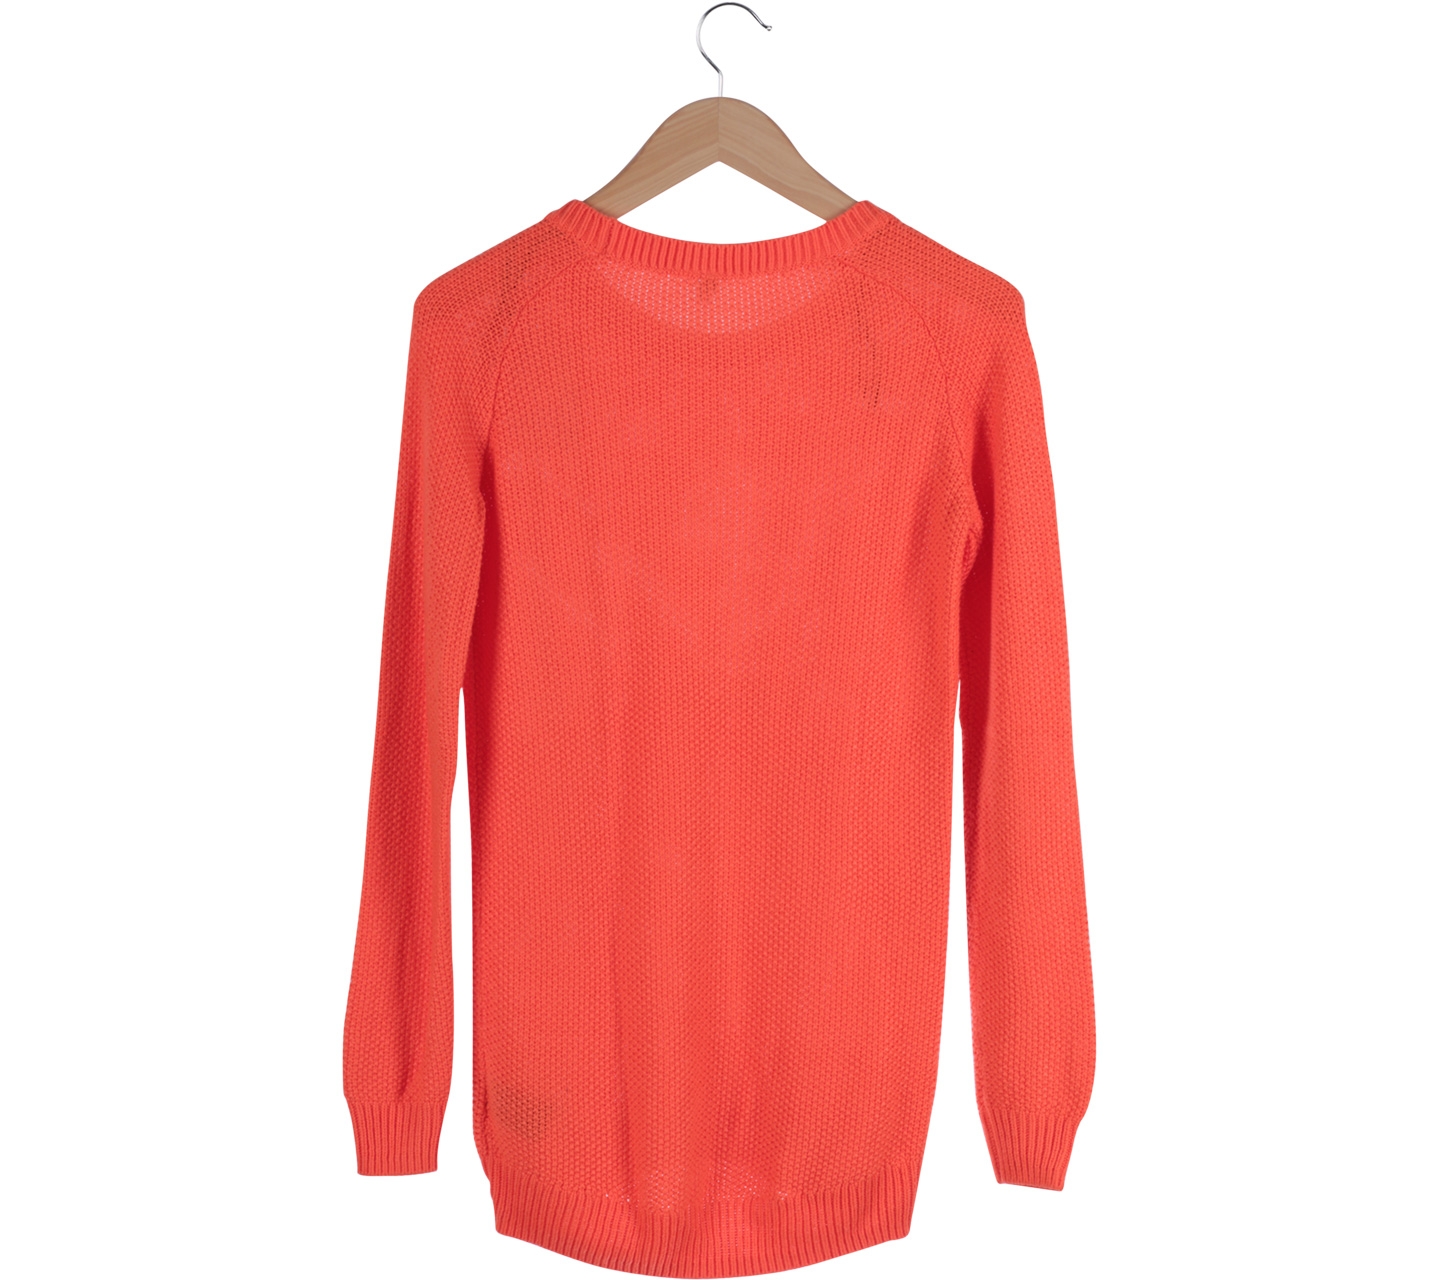 Divided Orange Cable Knitted Sweater